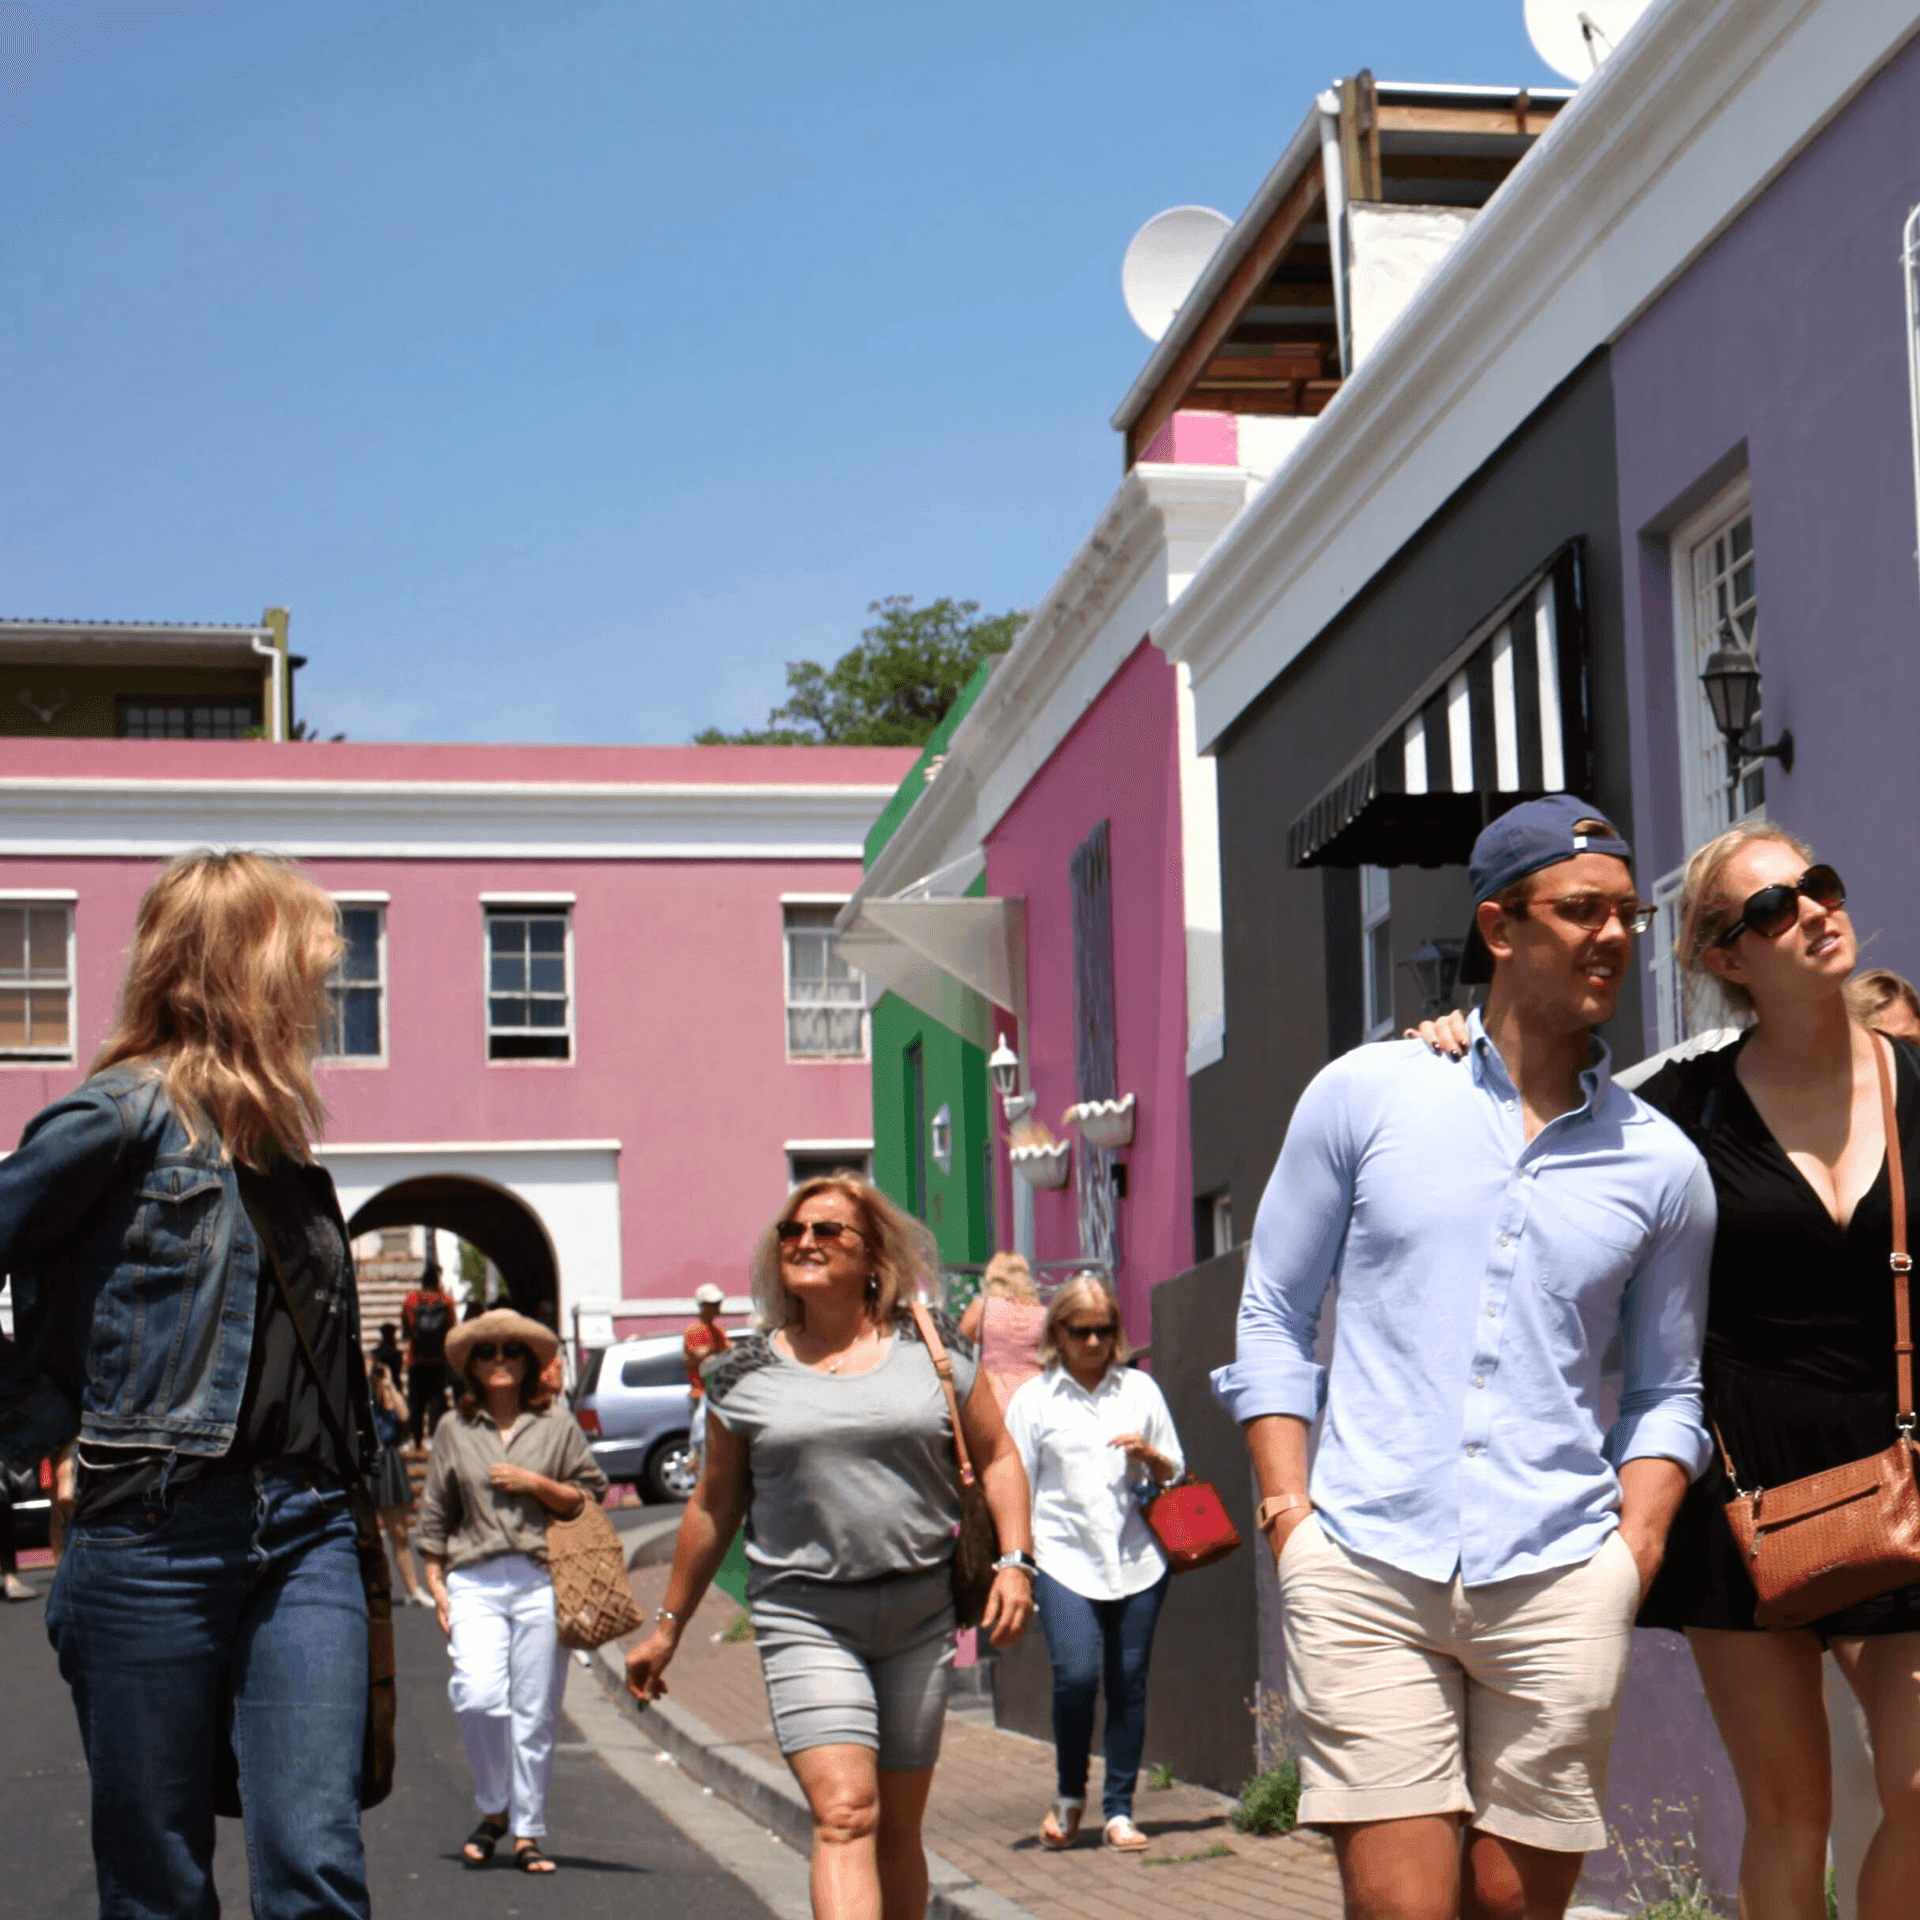 A tour group in Bo-Kaap's Chiappinni Street